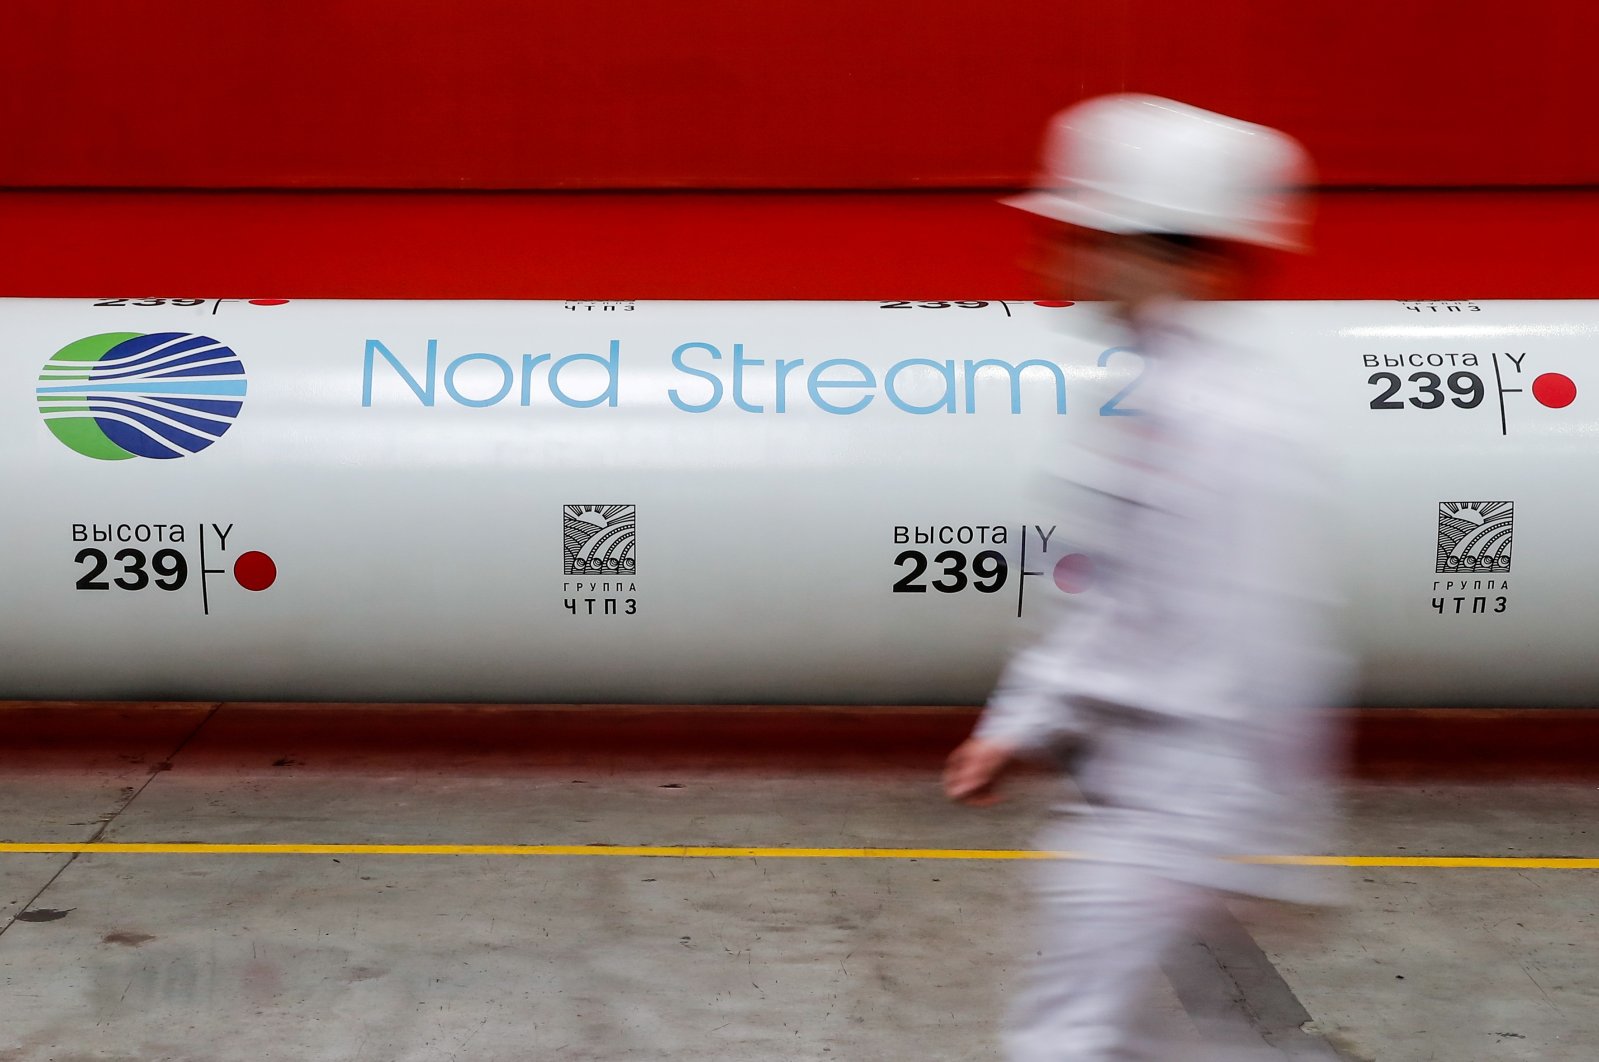 The logo of the Nord Stream 2 gas pipeline project is seen on a large diameter pipe at Chelyabinsk Pipe Rolling Plant owned by ChelPipe Group in Chelyabinsk, Russia, Feb. 26, 2020. (Reuters Photo)